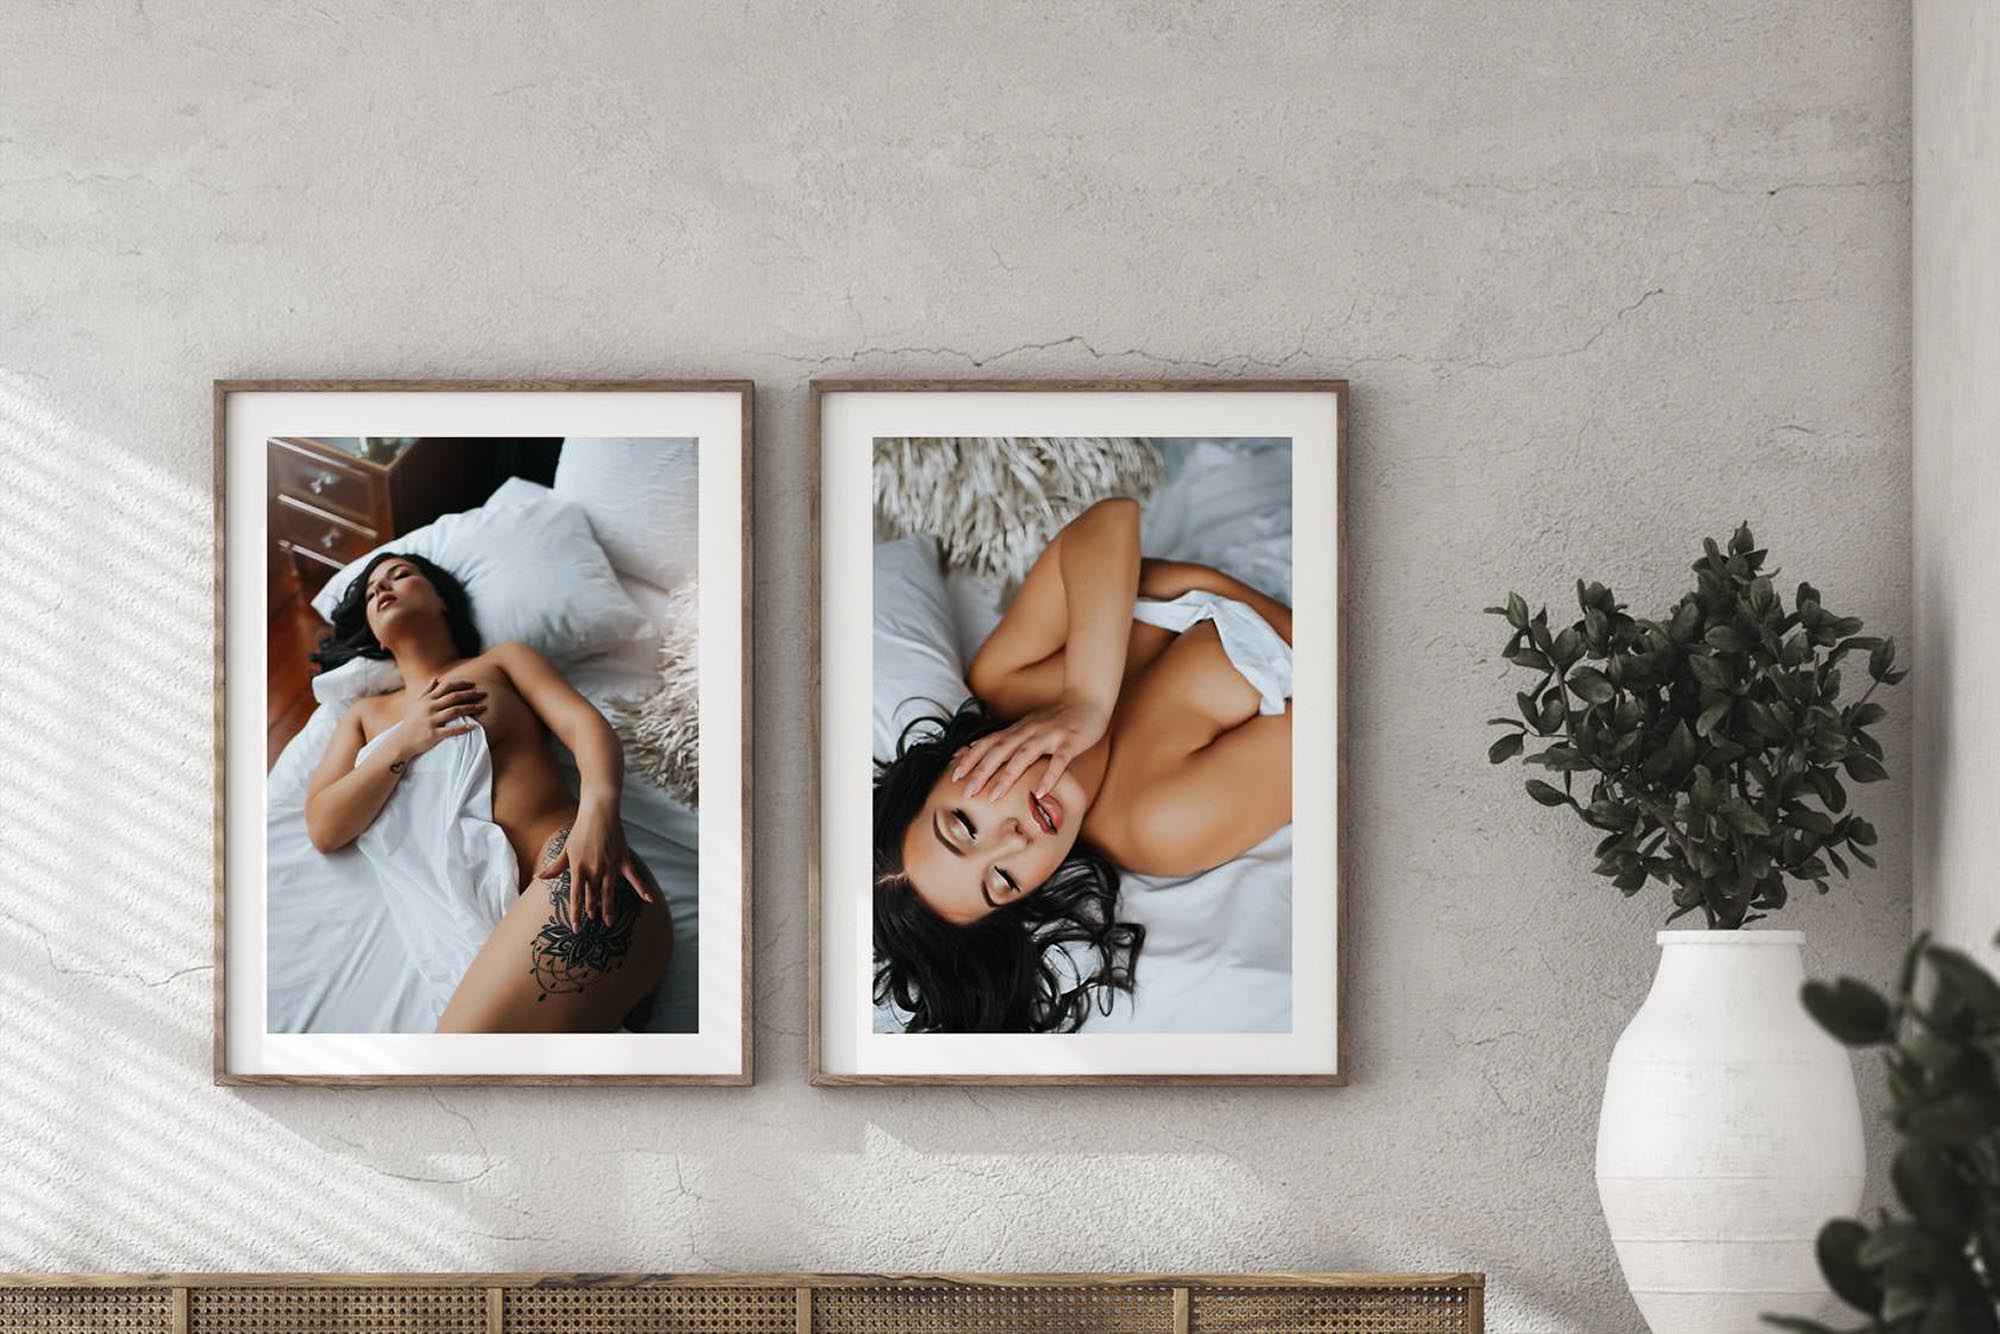 Boudoir products by Black Lace Boudoir in Washington D.C. Virginia, Maryland showcasing two large print wall art photos hanging on a wall.